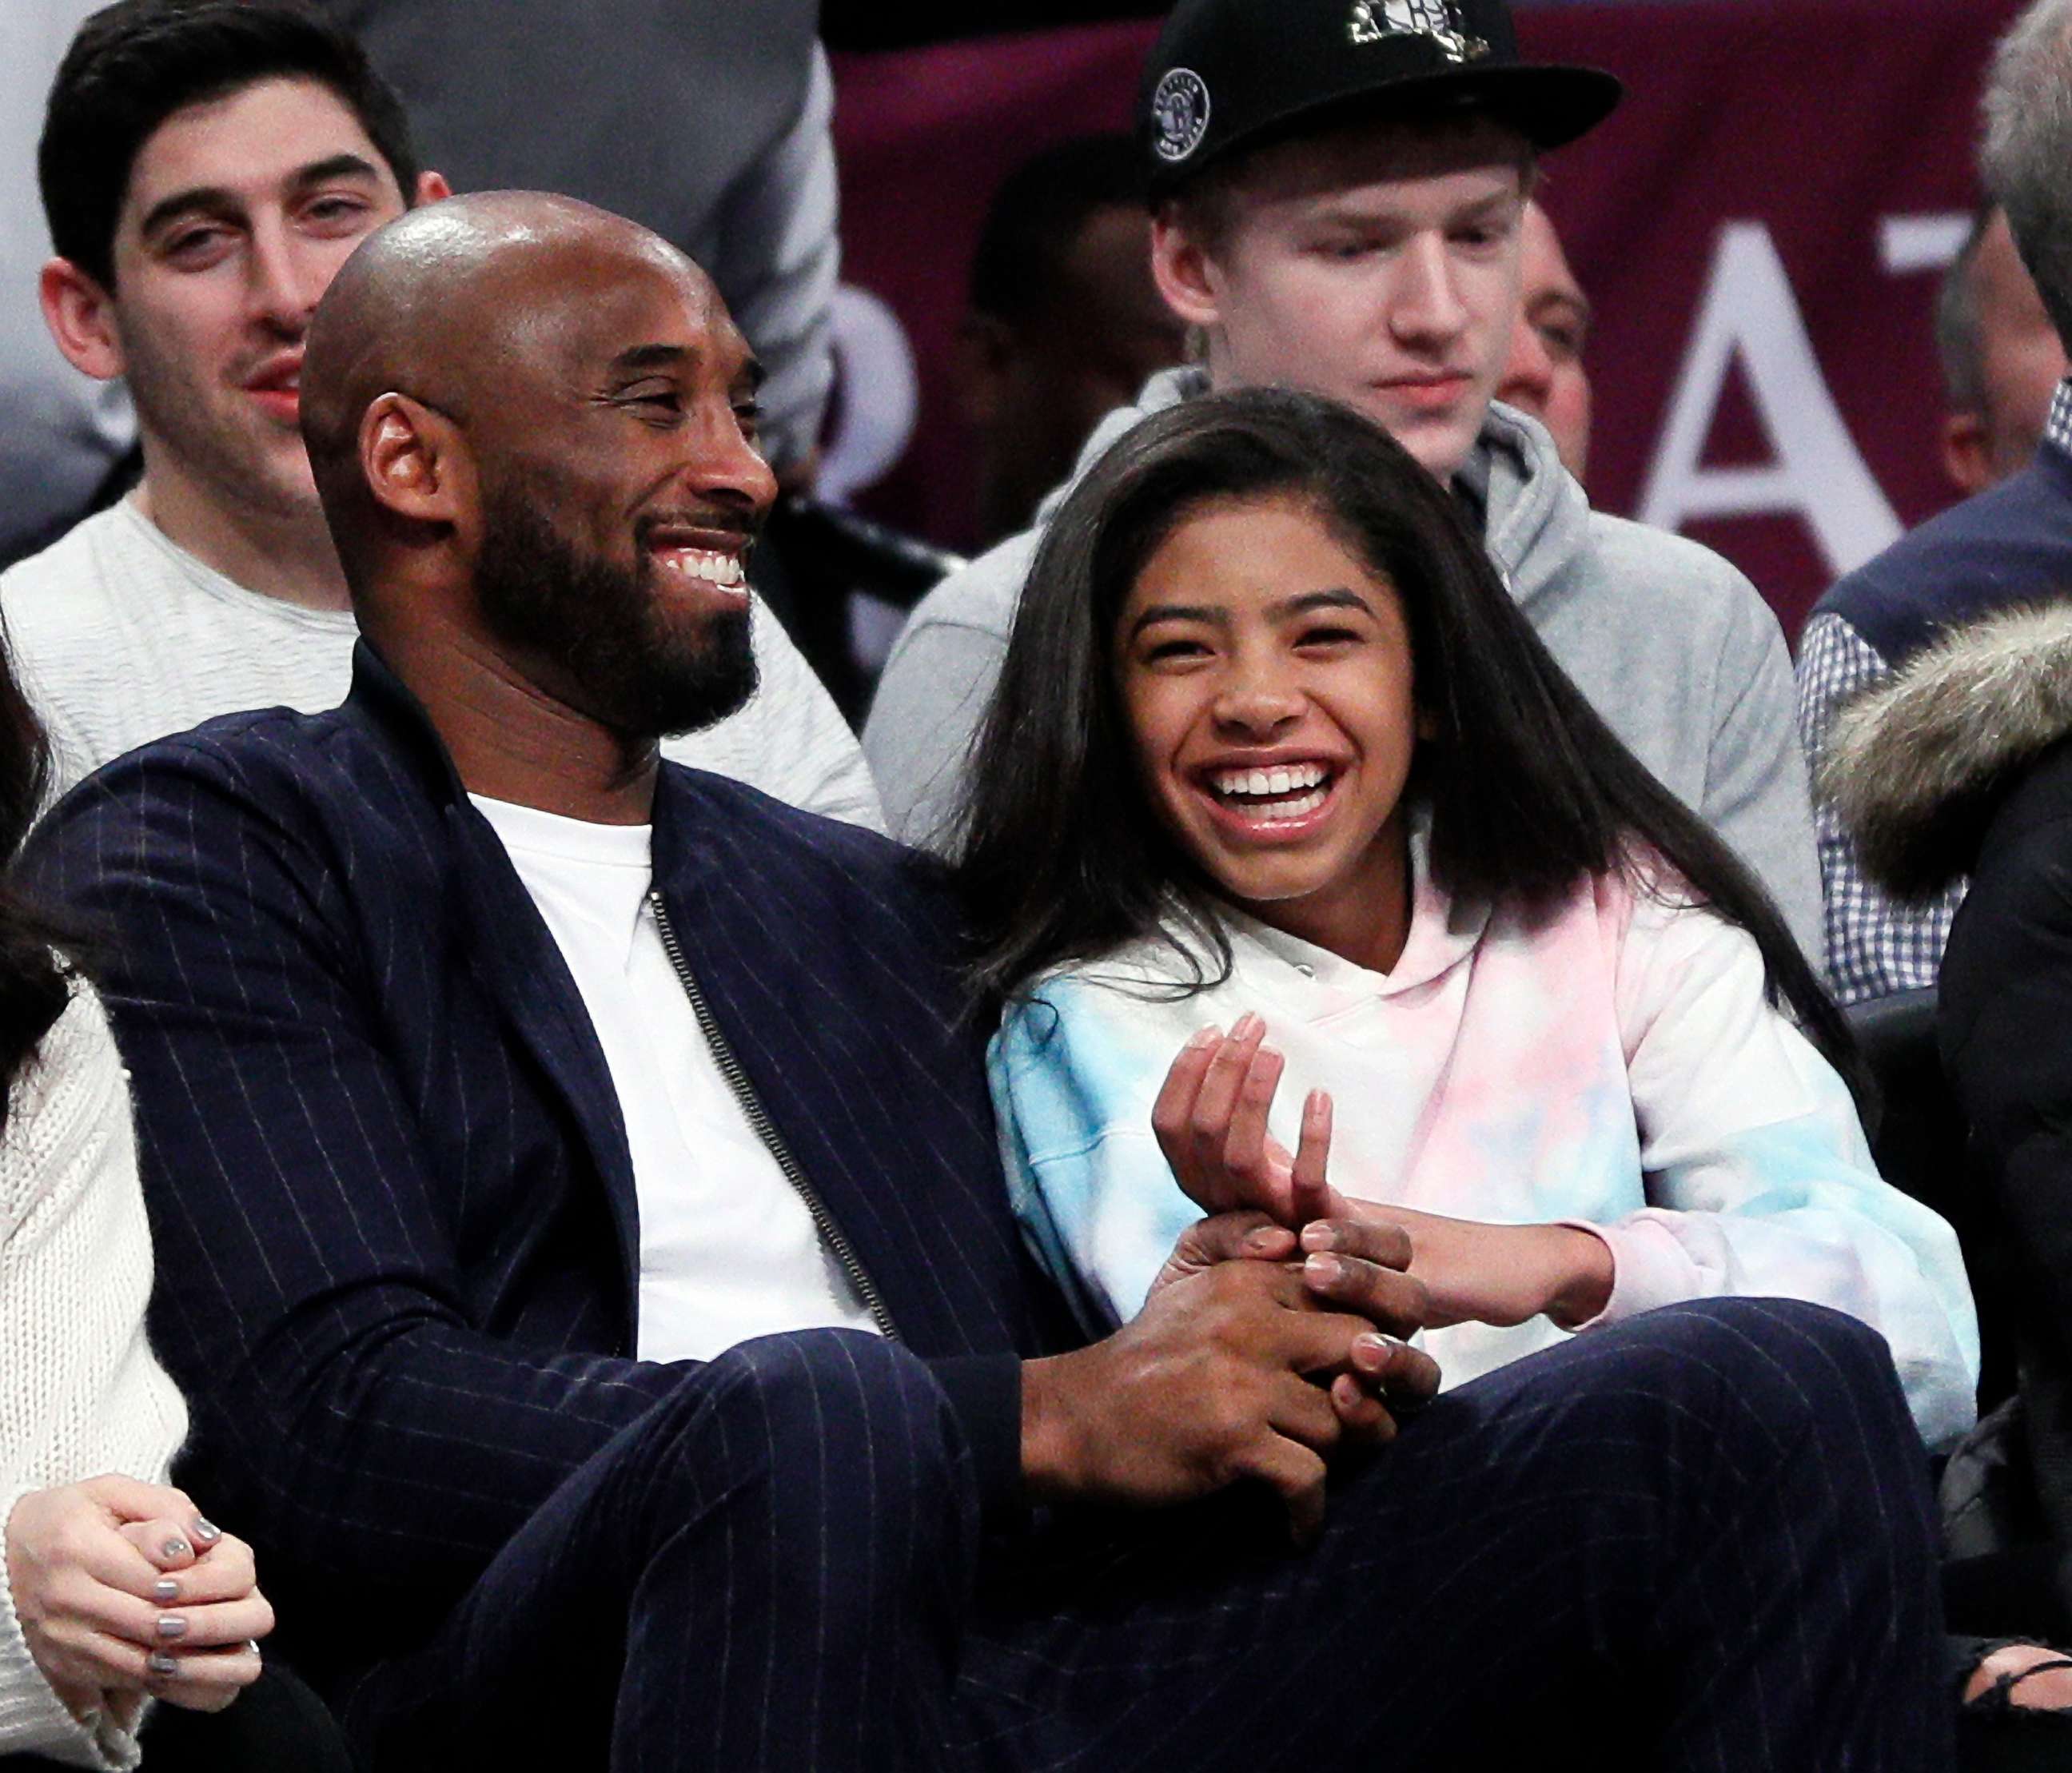 Kobe Was Coaching His Daughter to Be the Family's Next Basketball Star